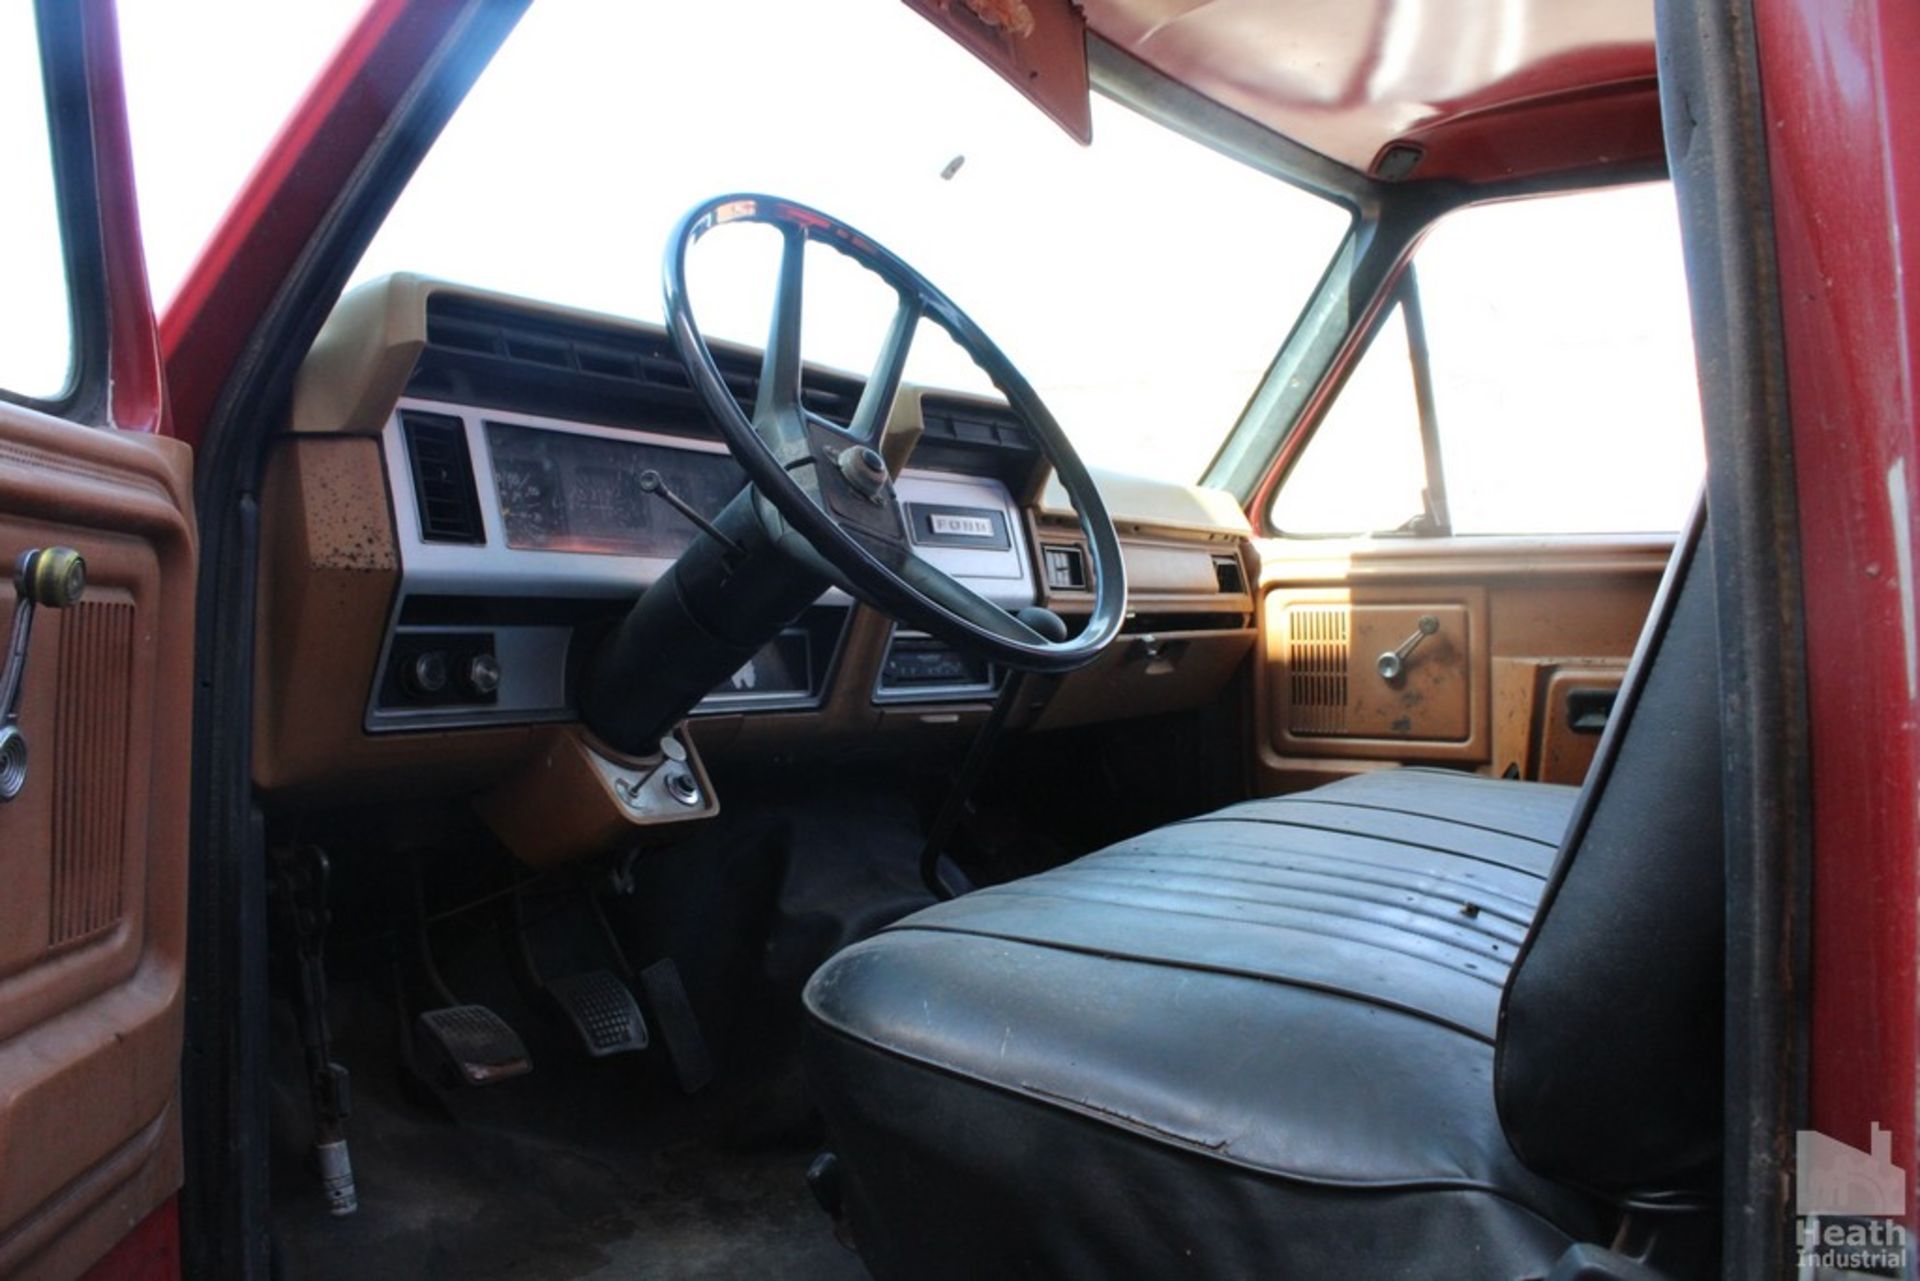 1980 FORD MODEL F700 STAKE TRUCK, VIN F70HVGH0858, AUTOMATIC TRANSMISSION, 16â€™ STEEL DECK WITH - Image 4 of 7